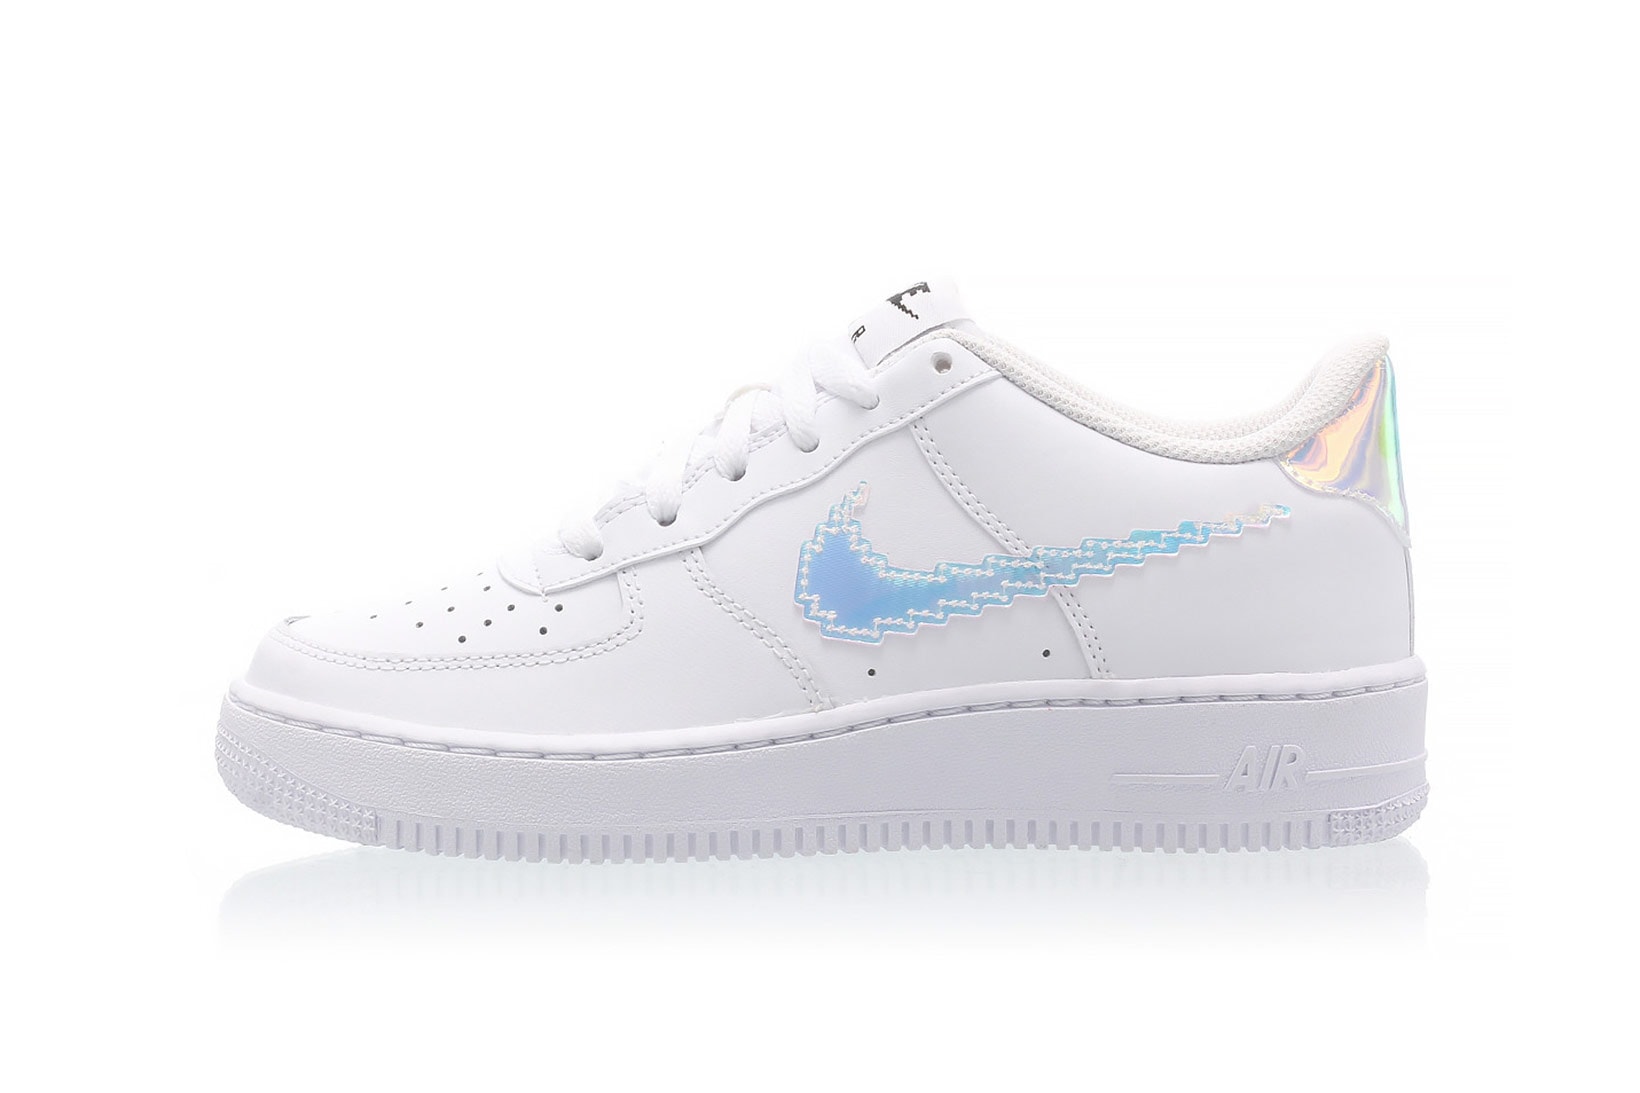 NIKE AIR FORCE 1 LV8 UTILITY - SKETCH PACK - AVAILABLE NOW - The Drop Date